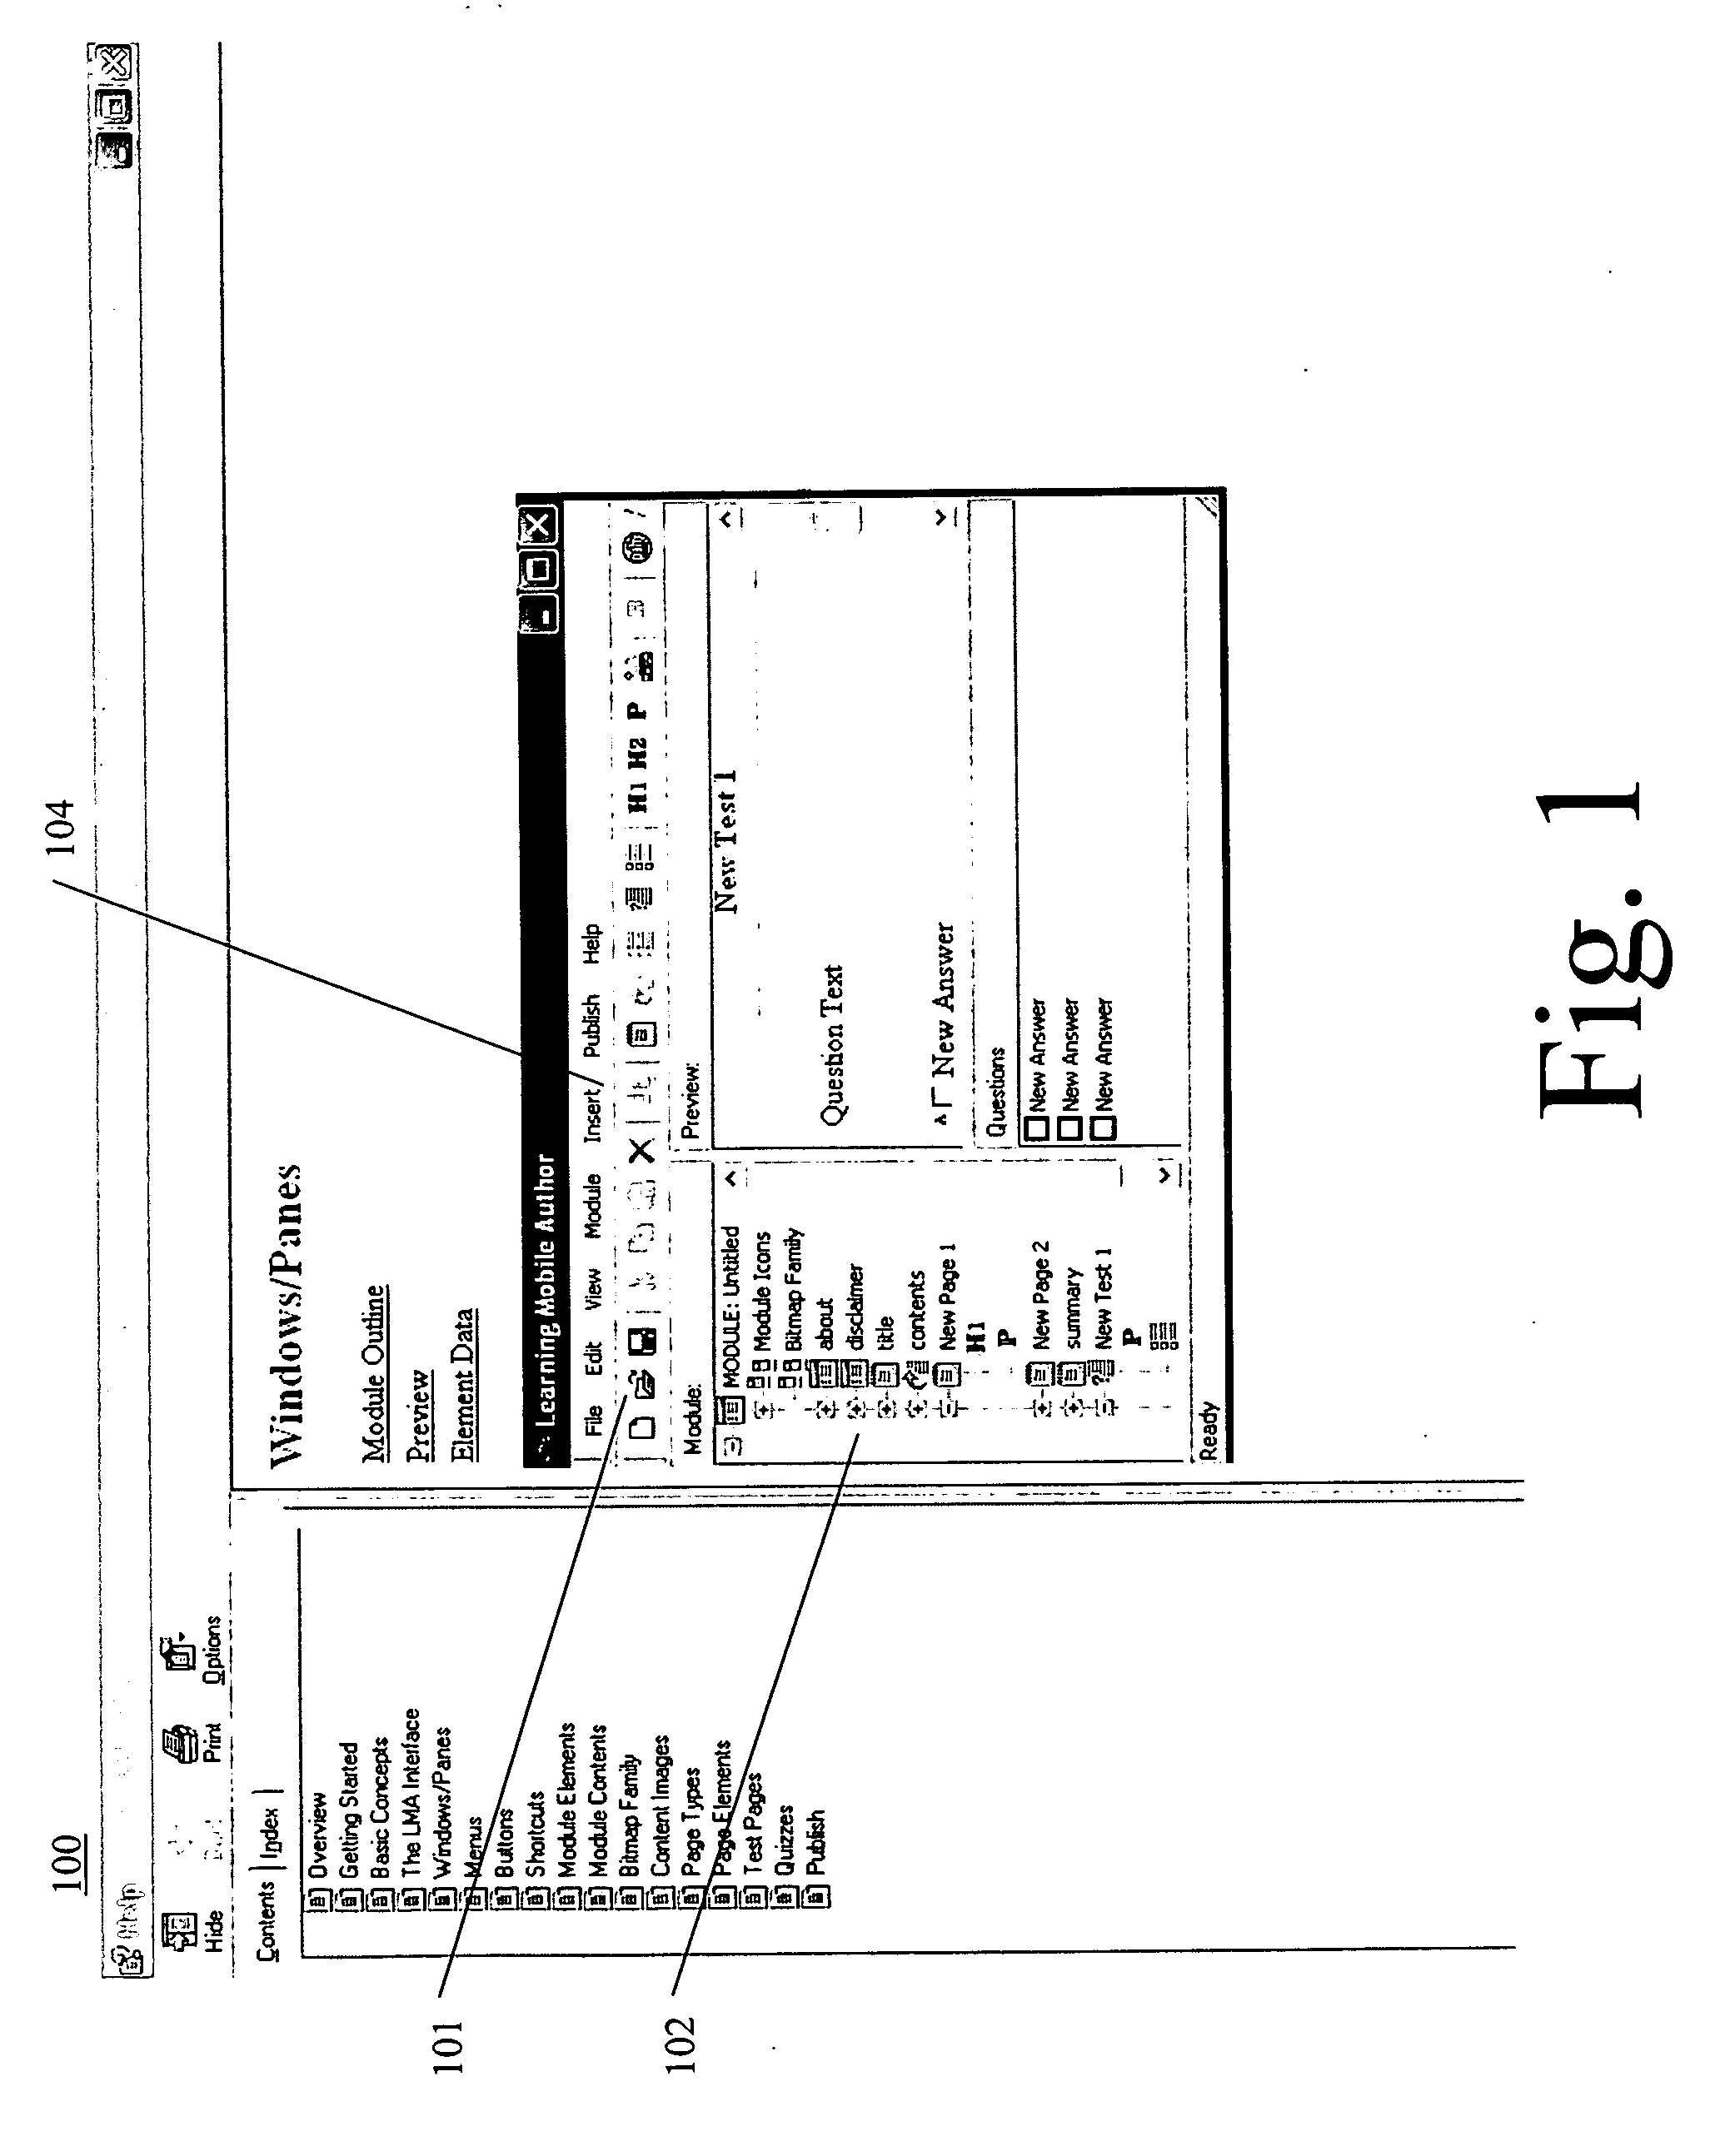 System and method for the delivery of education solutions via handheld devices